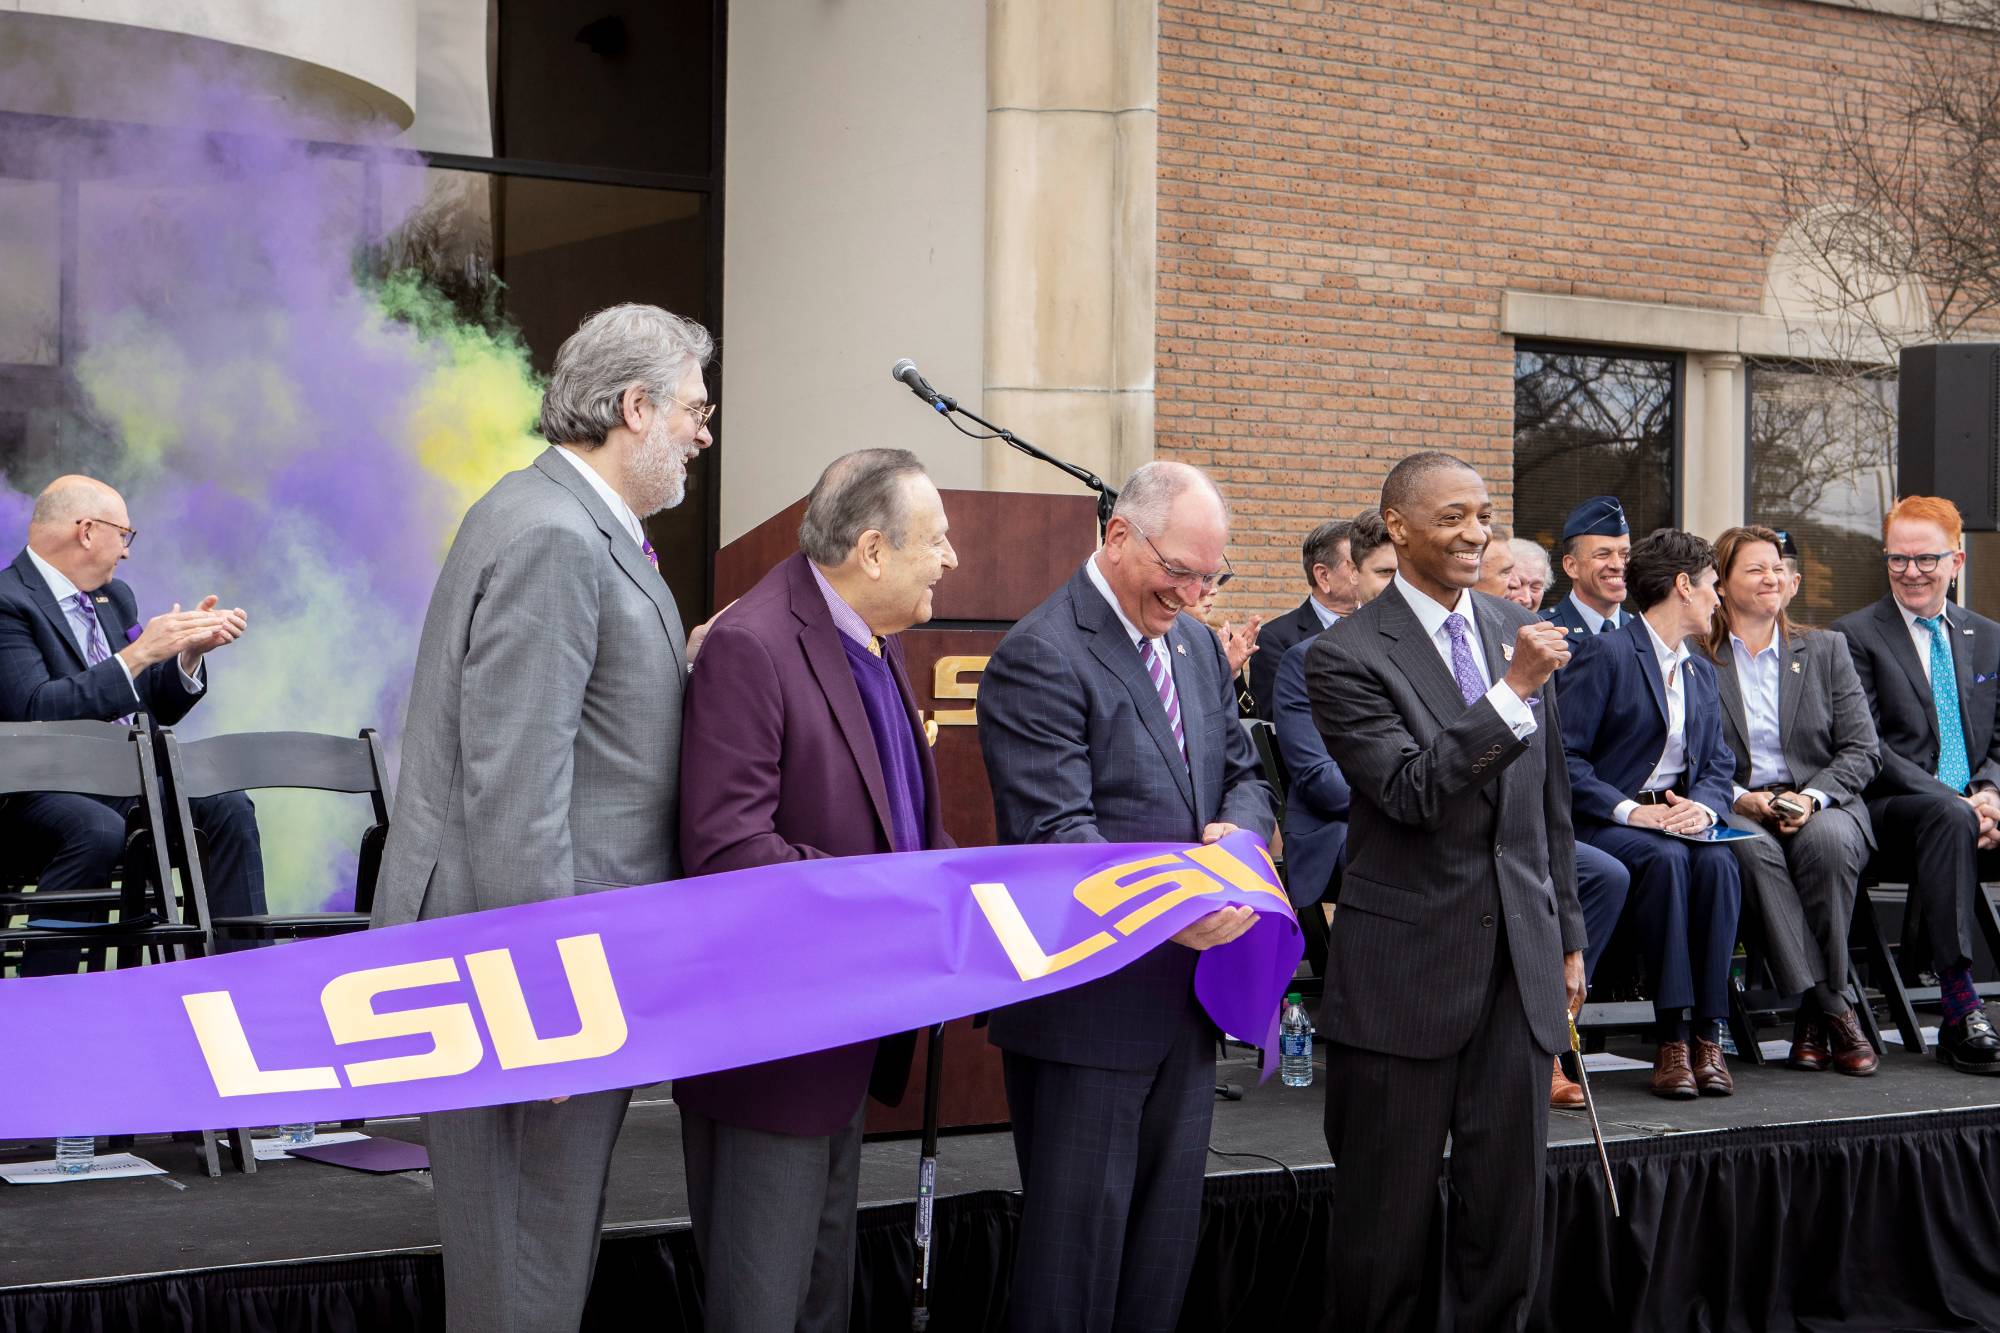 LSU President William F. Tate IV at ribbon cutting with governor and others